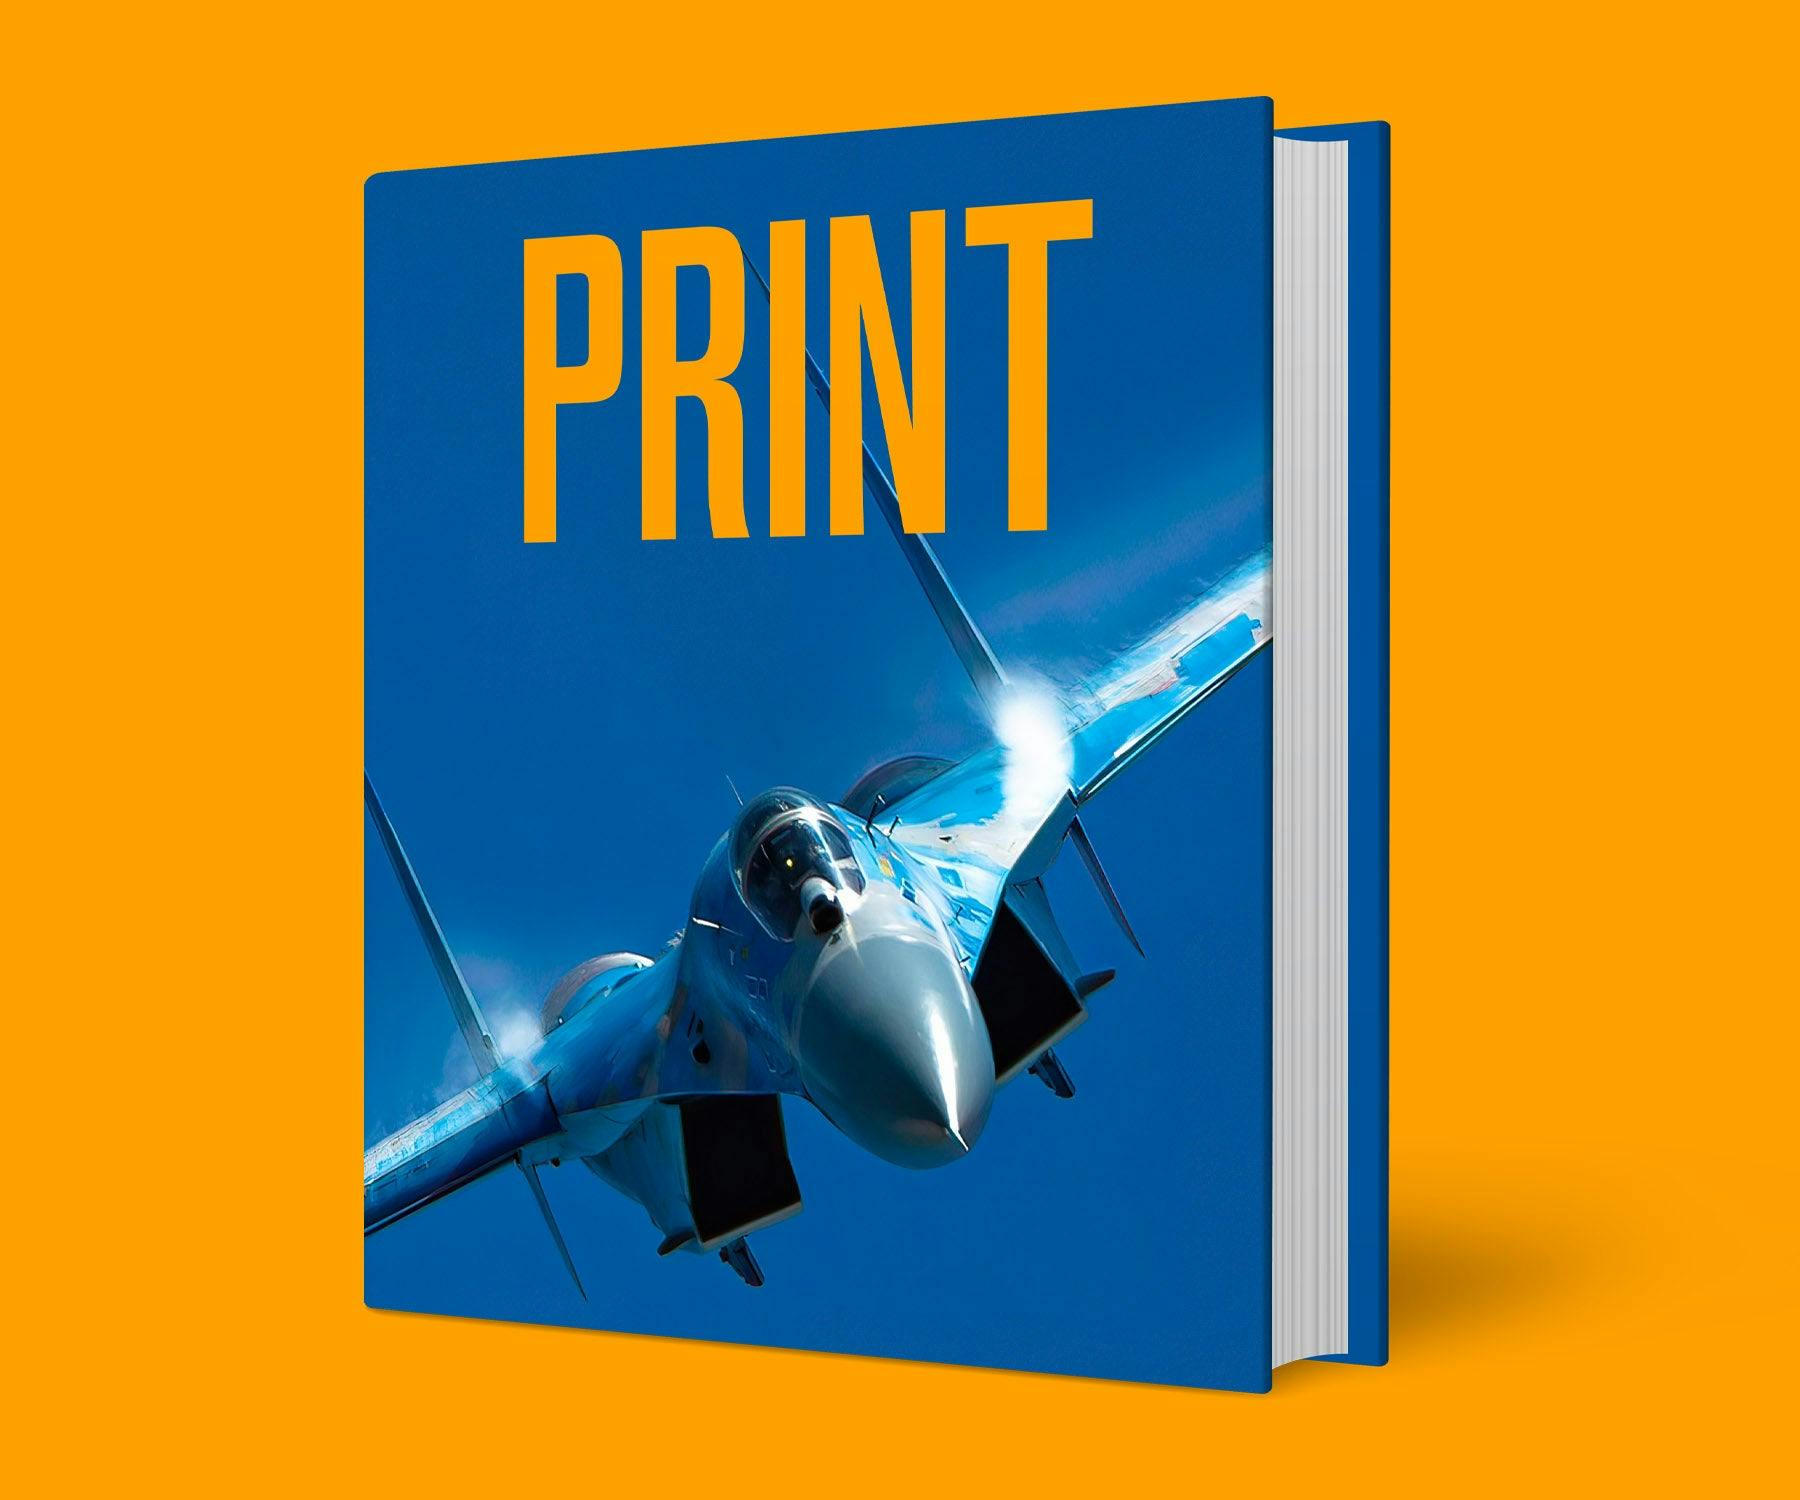 Your name written on a warplane in the book plus a print